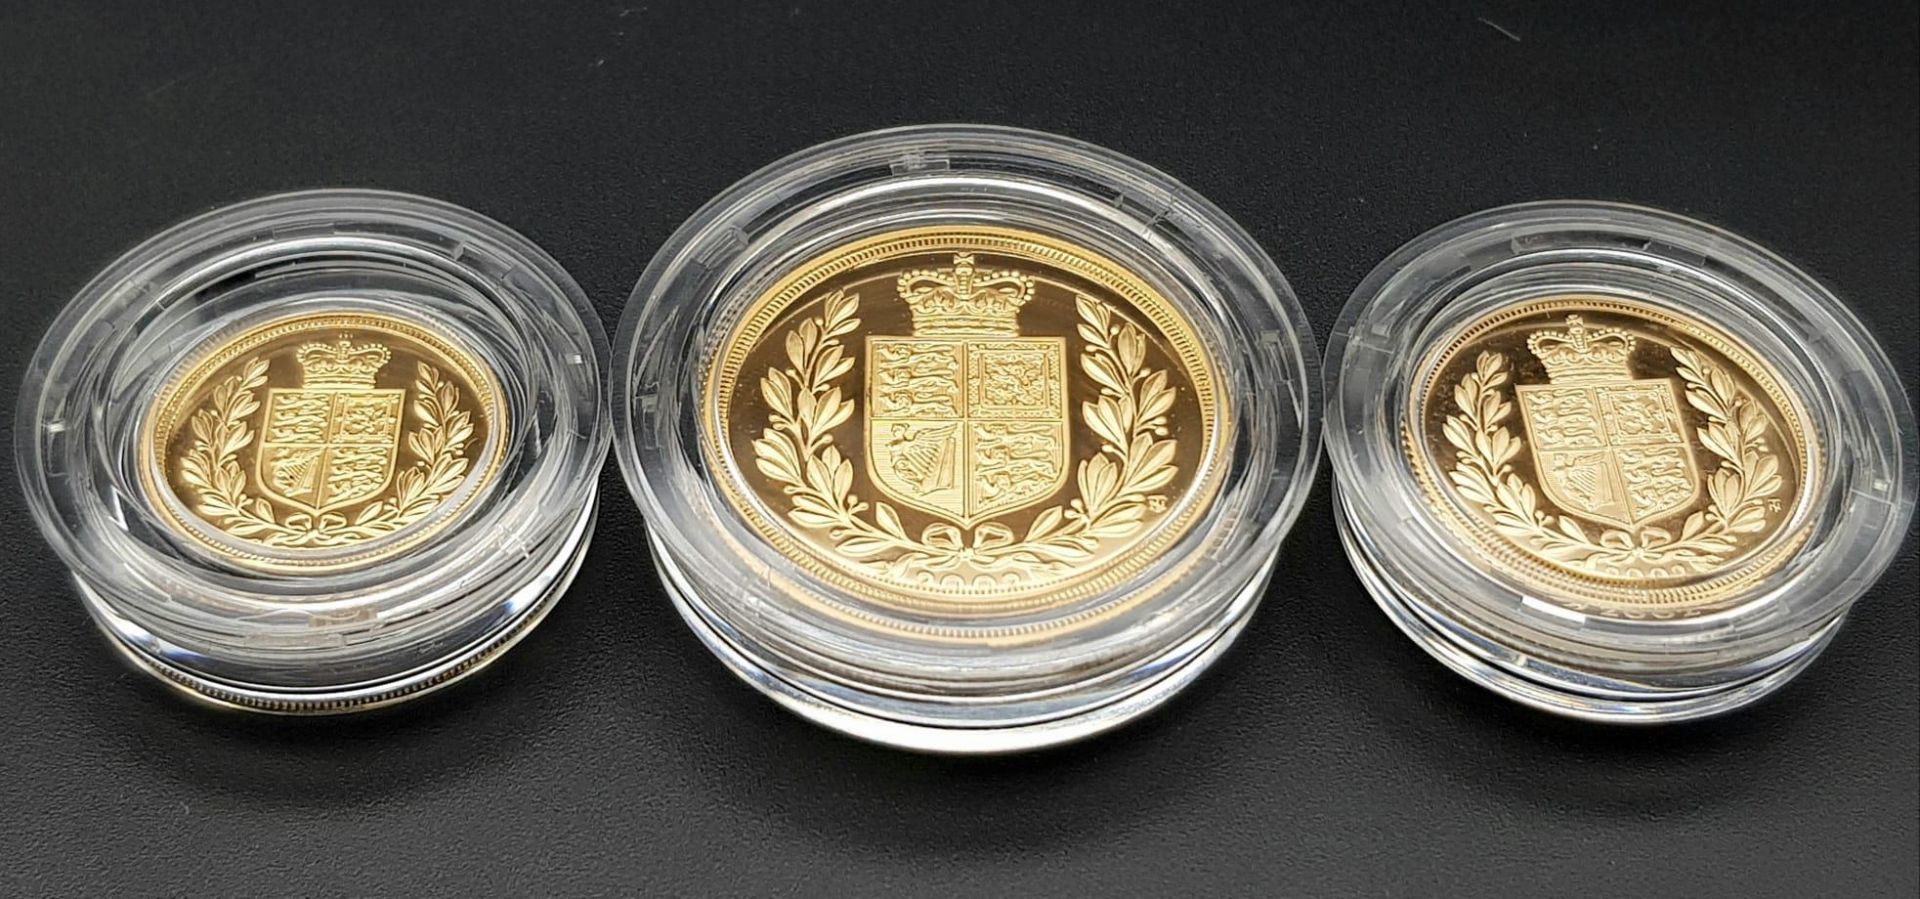 A Royal Mint 2002 Three Sovereign 22K Gold Proof Coin Set. This set features a double sovereign, - Image 2 of 7